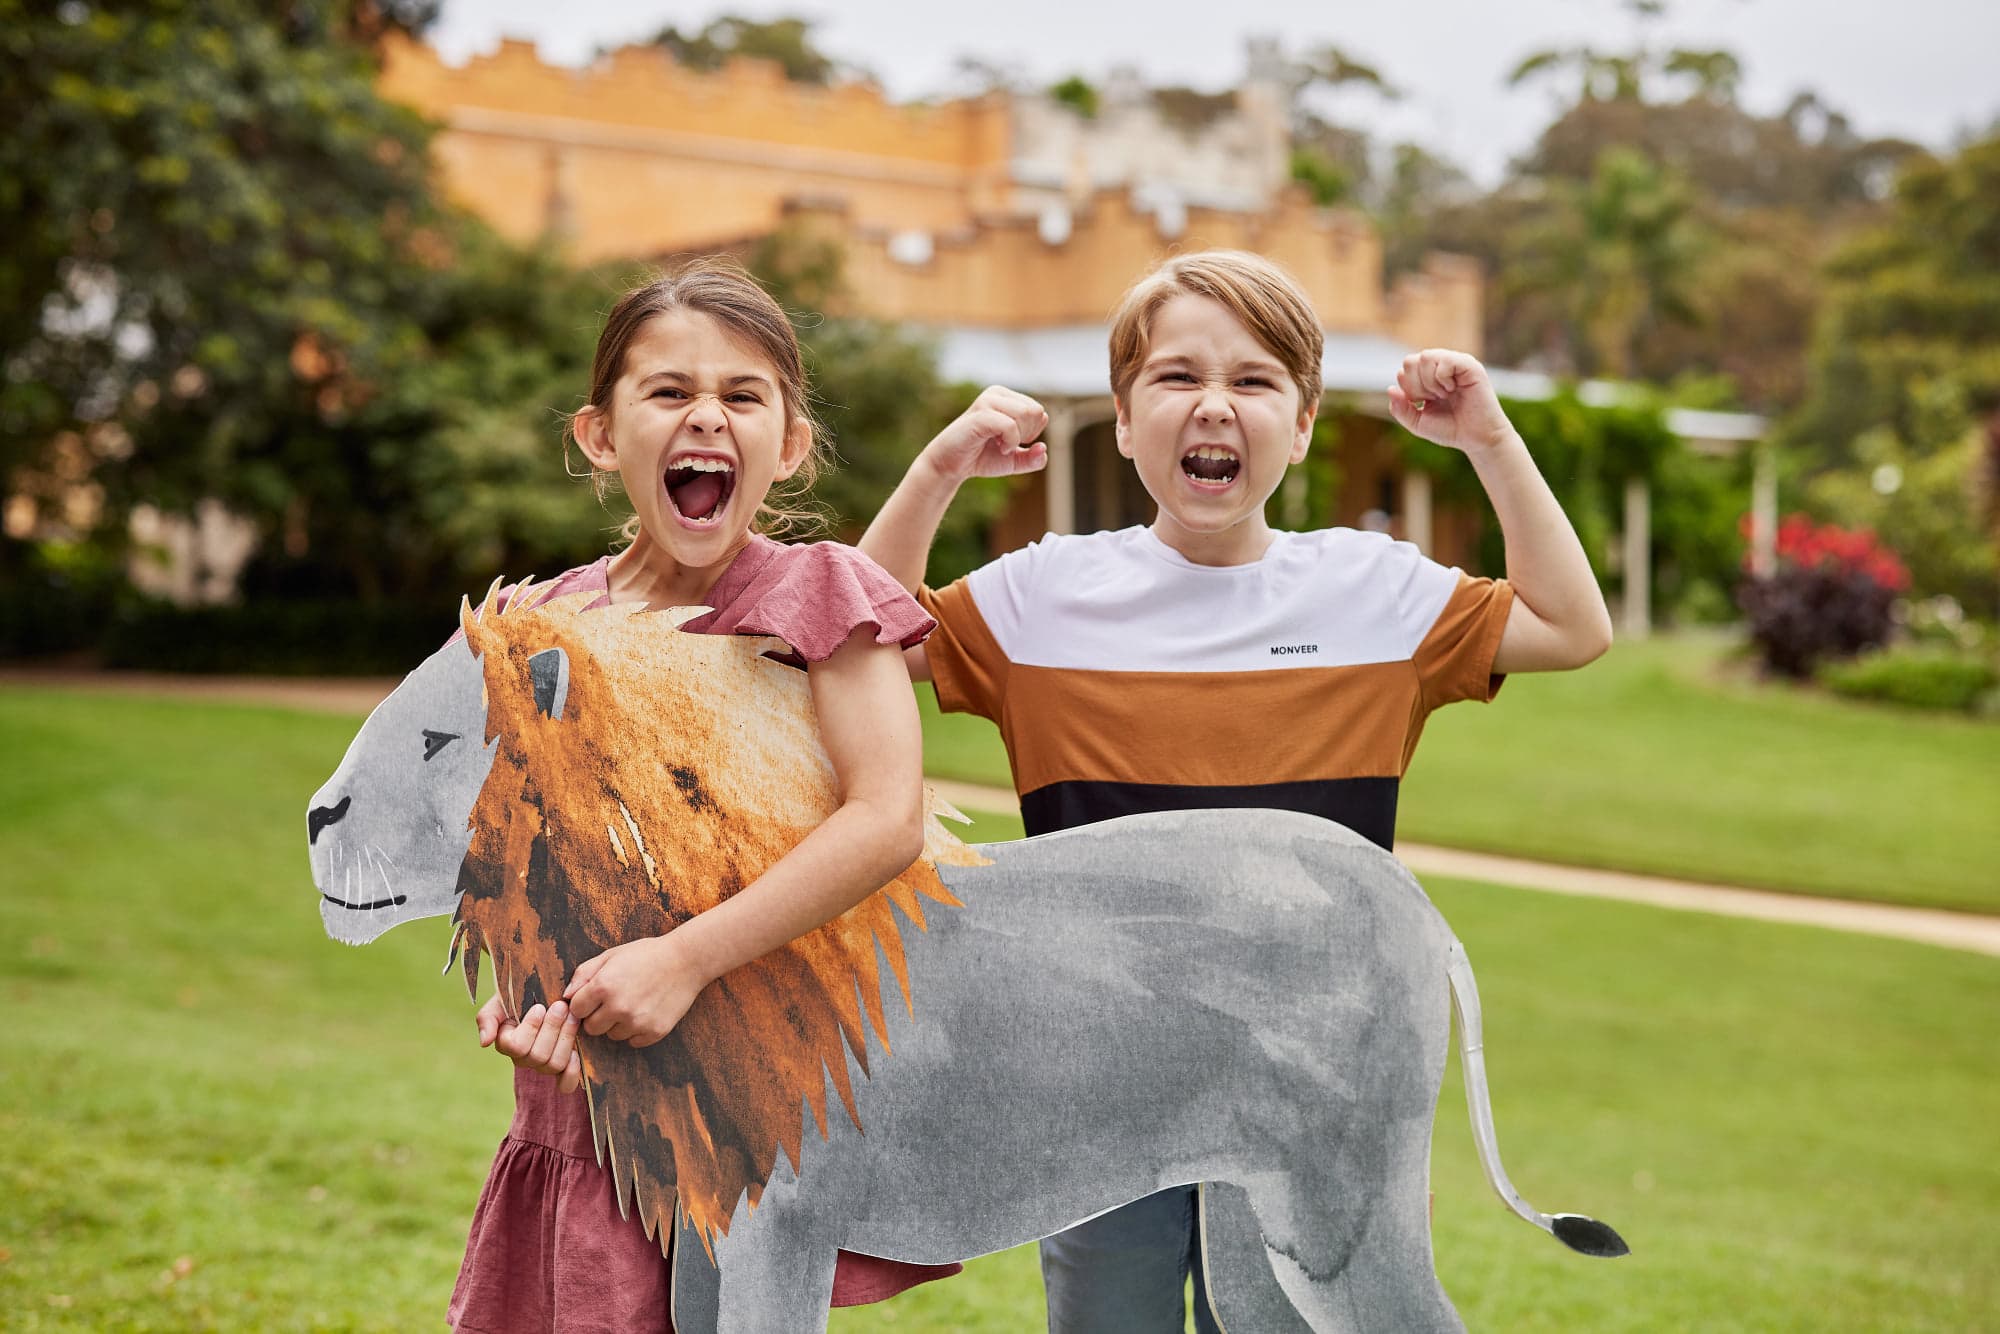 Sydney And New Zealand Family Travel In 2022 Wildlife Retreat at Taronga is an eco-retreat for the family to connect with nature, wildlife, and with each other. | Credit: Taronga Zoo Facebook